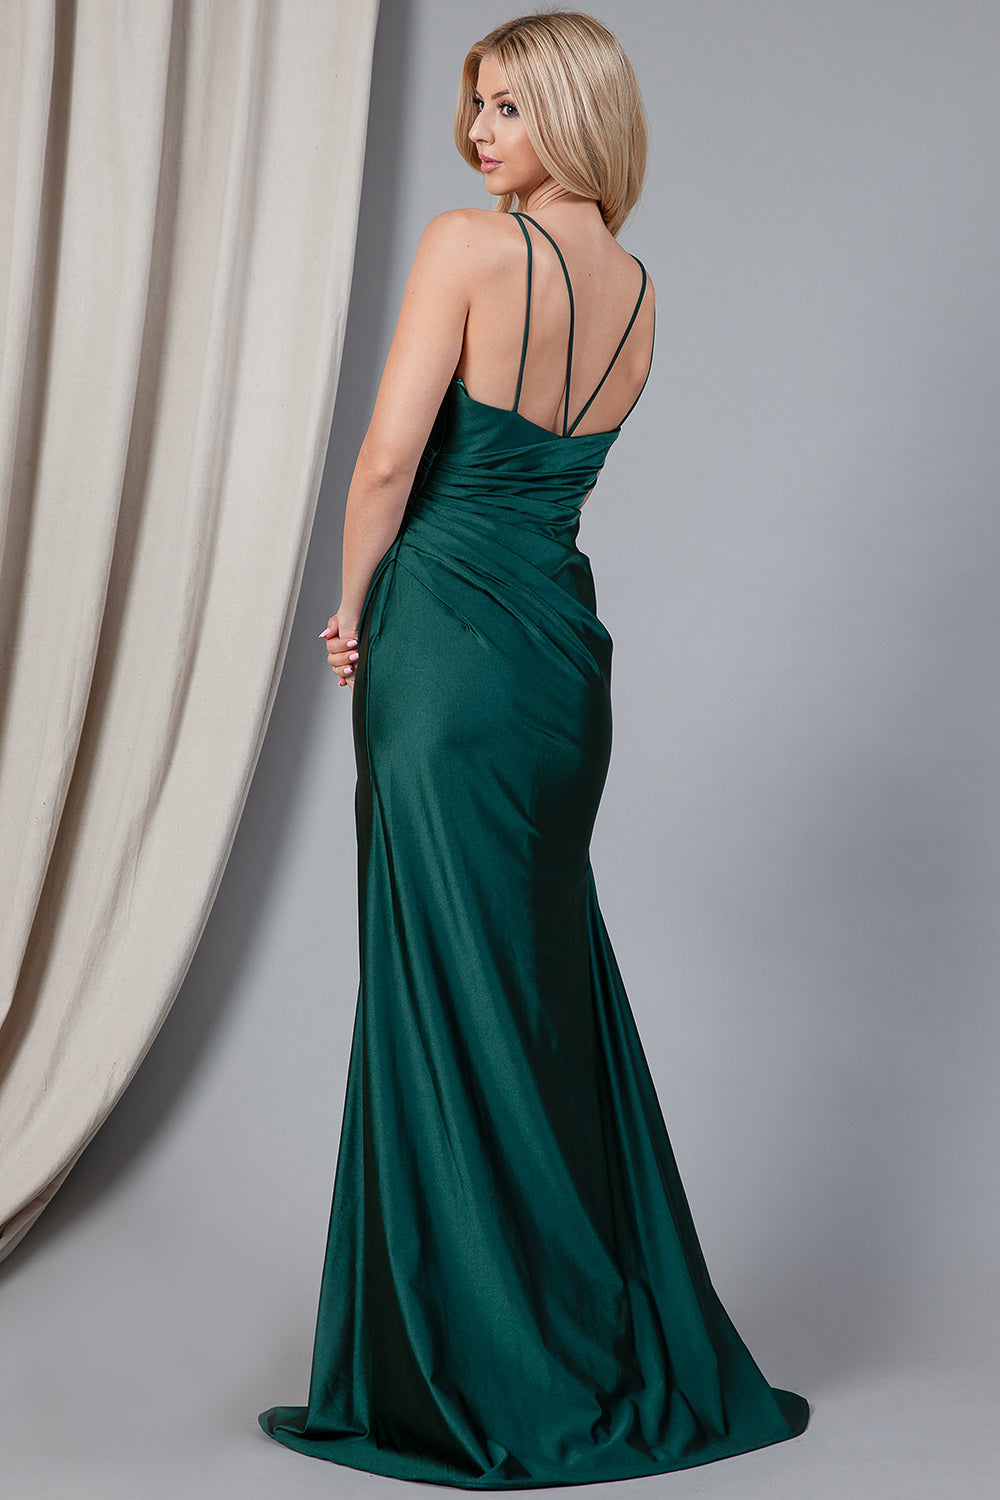 AC24-391 Fitted lycra maxi dress with a high slit, ruching side detail & zipper